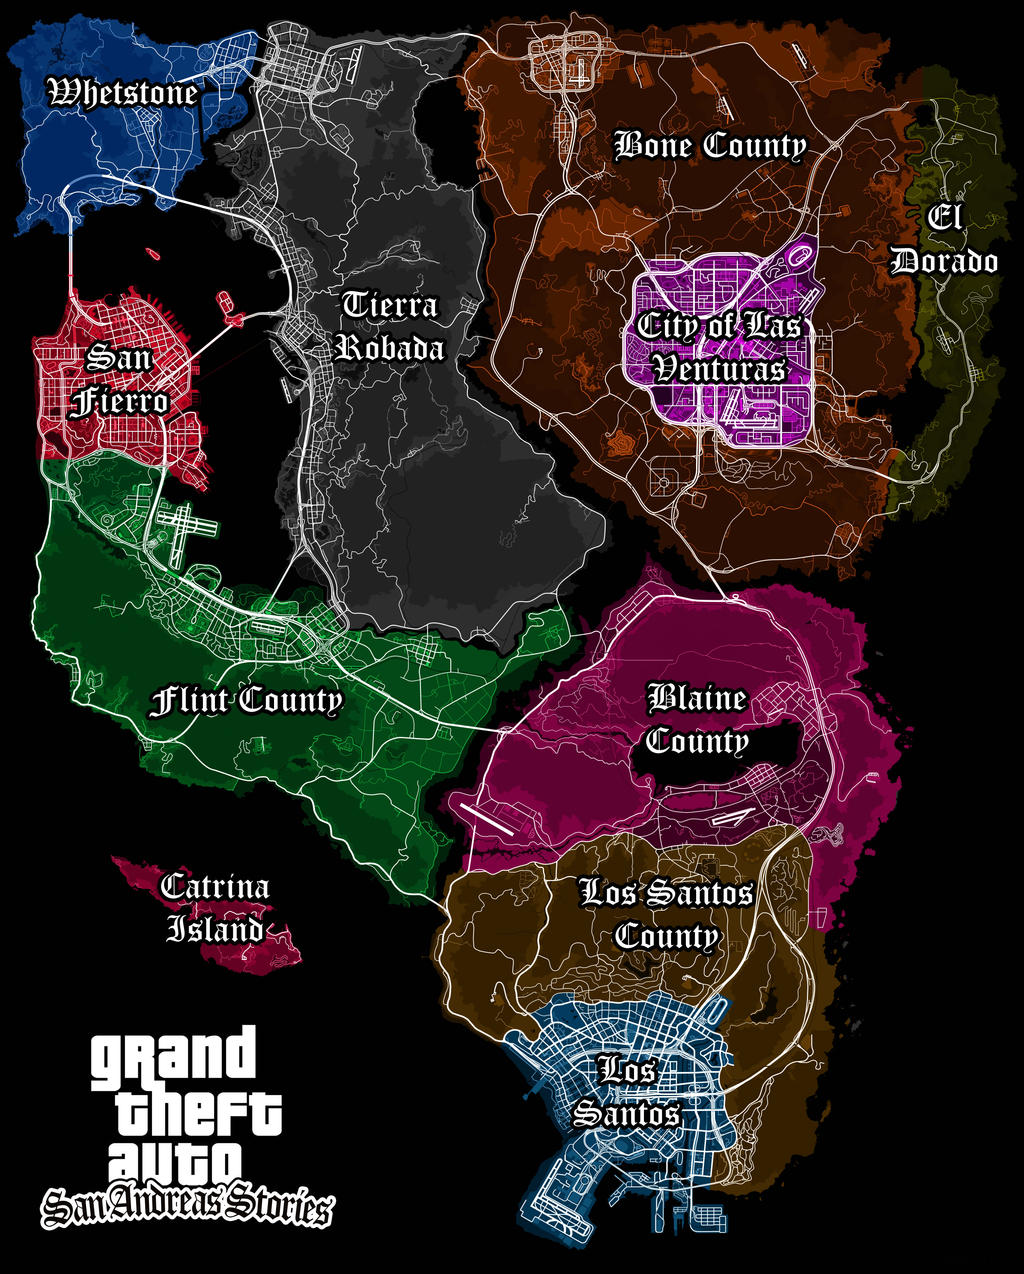 Updated Map of GTA:San Andreas With Real Life Locations (Included